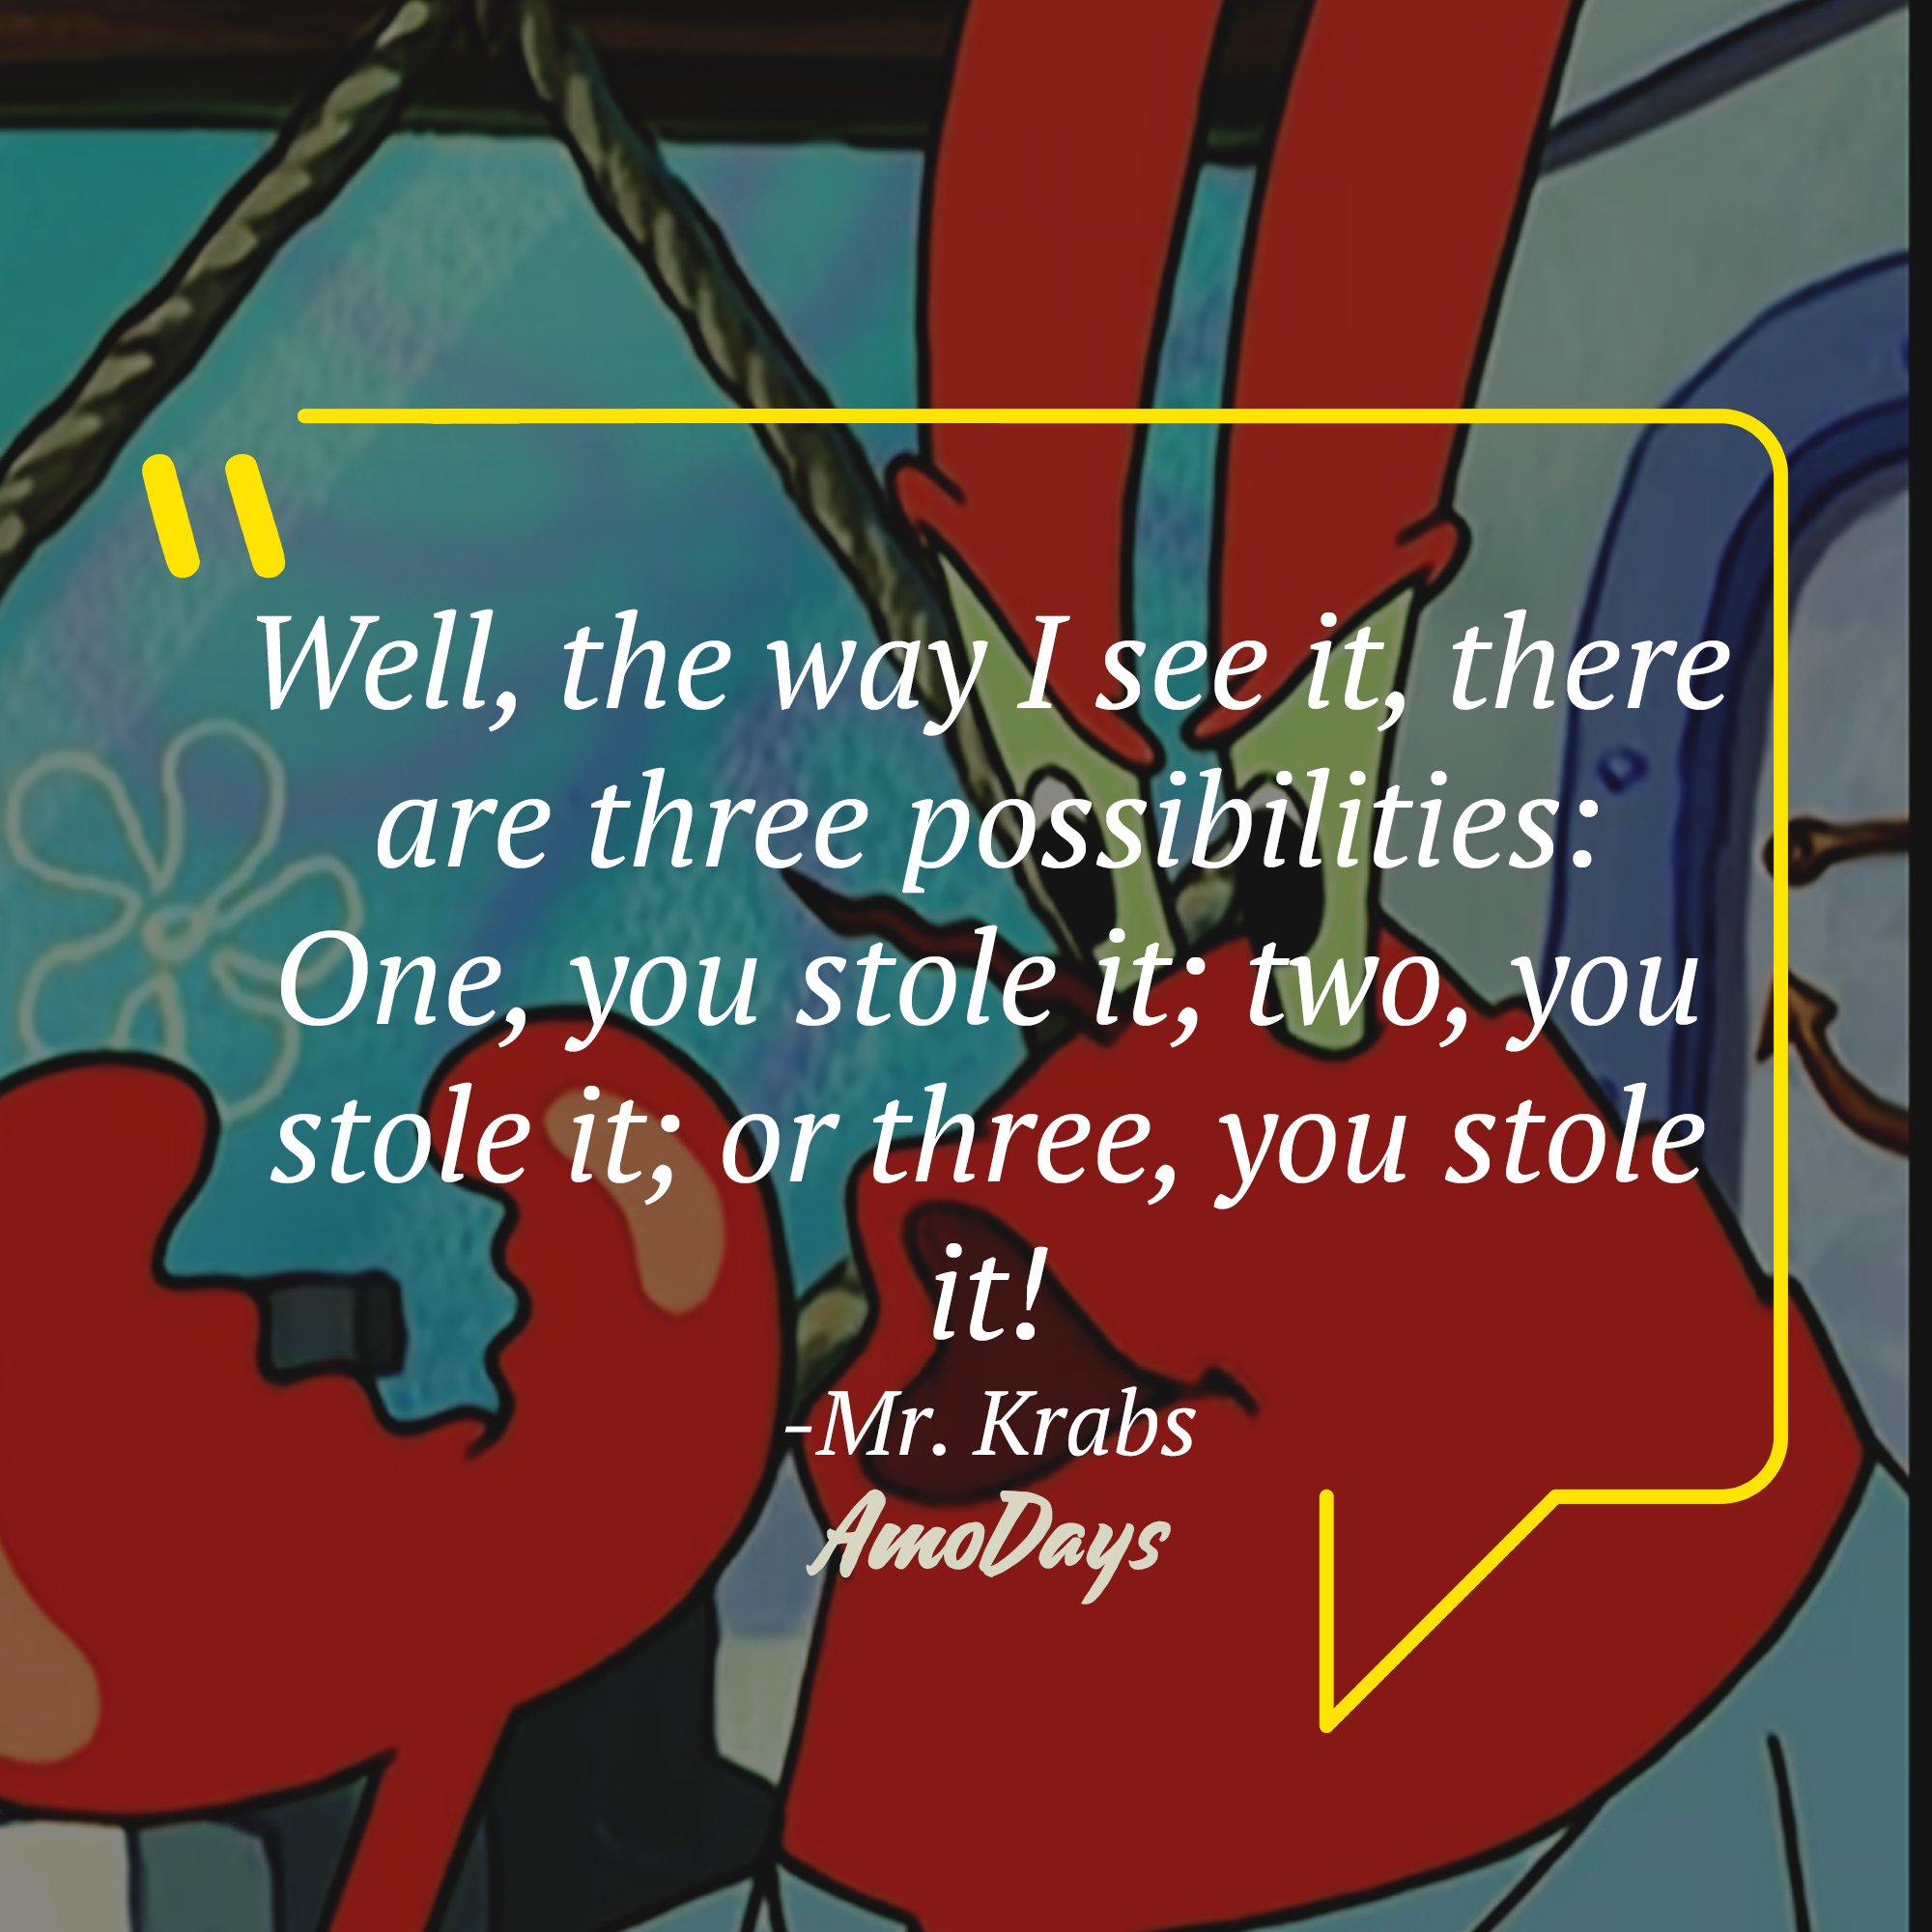 Mr. Krabs's quote: "Well, the way I see it, there are three possibilities: One, you stole it; two, you stole it; or three, you stole it!" | Source: AmoDays